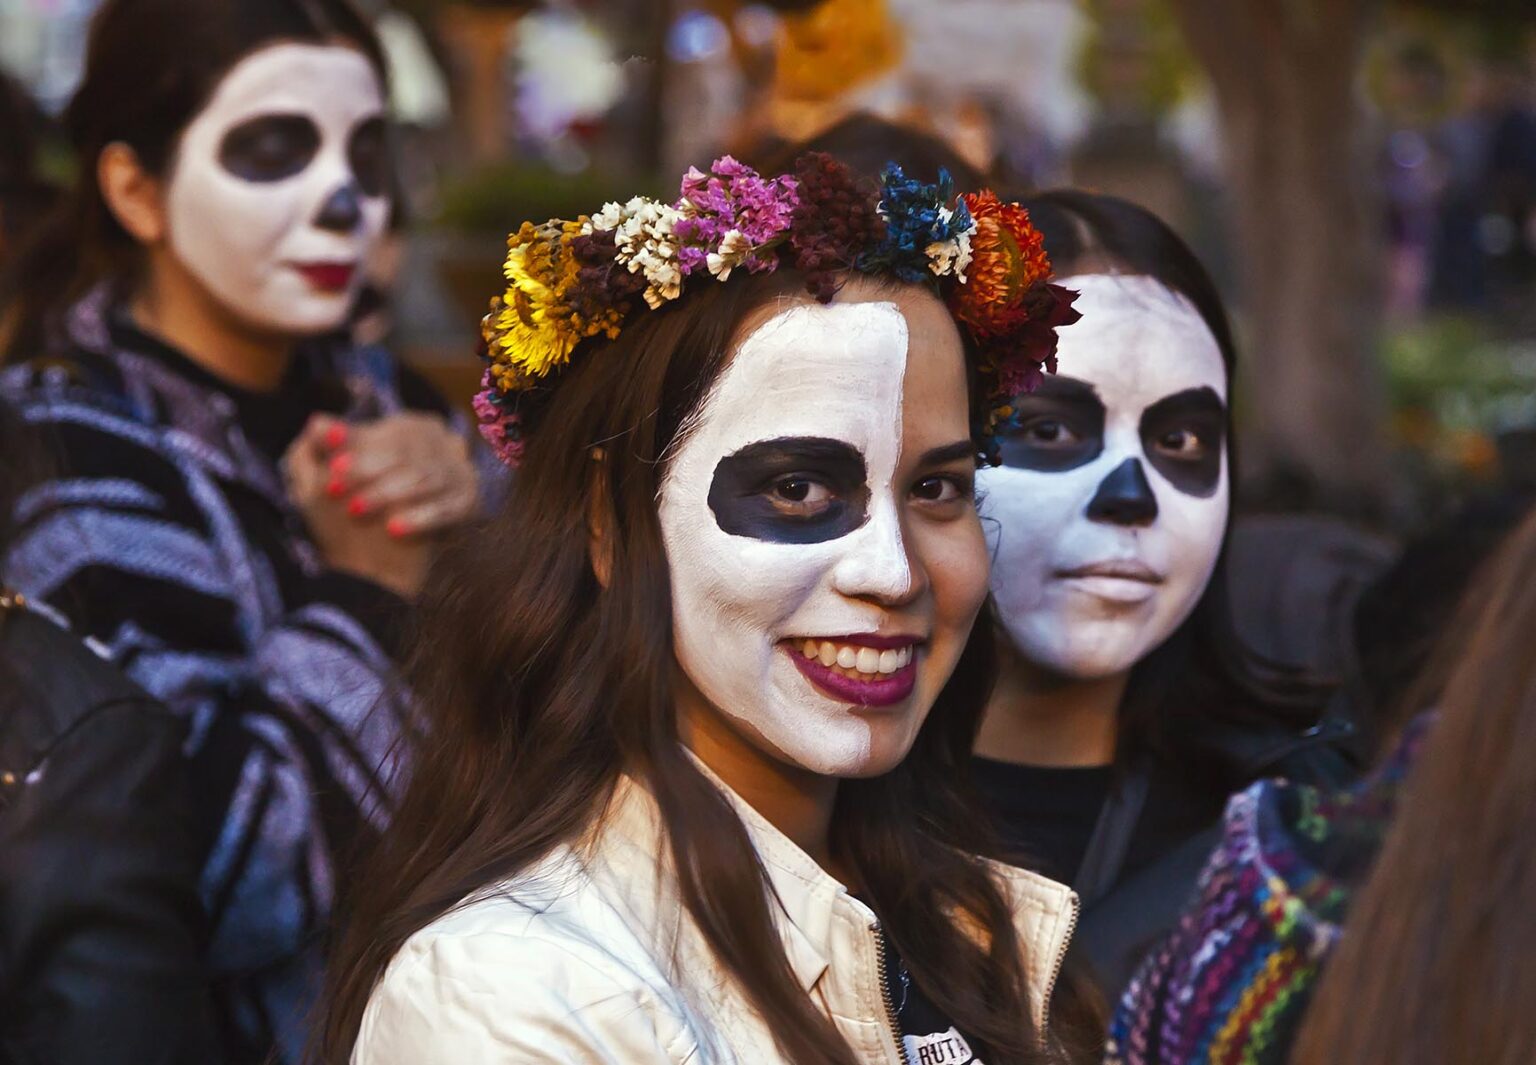 Faces are painted like skulls as people transform themselves into CATRINAS during DAY OF THE DEAD  -  SAN MIGUEL DE ALLENDE, MEXICO